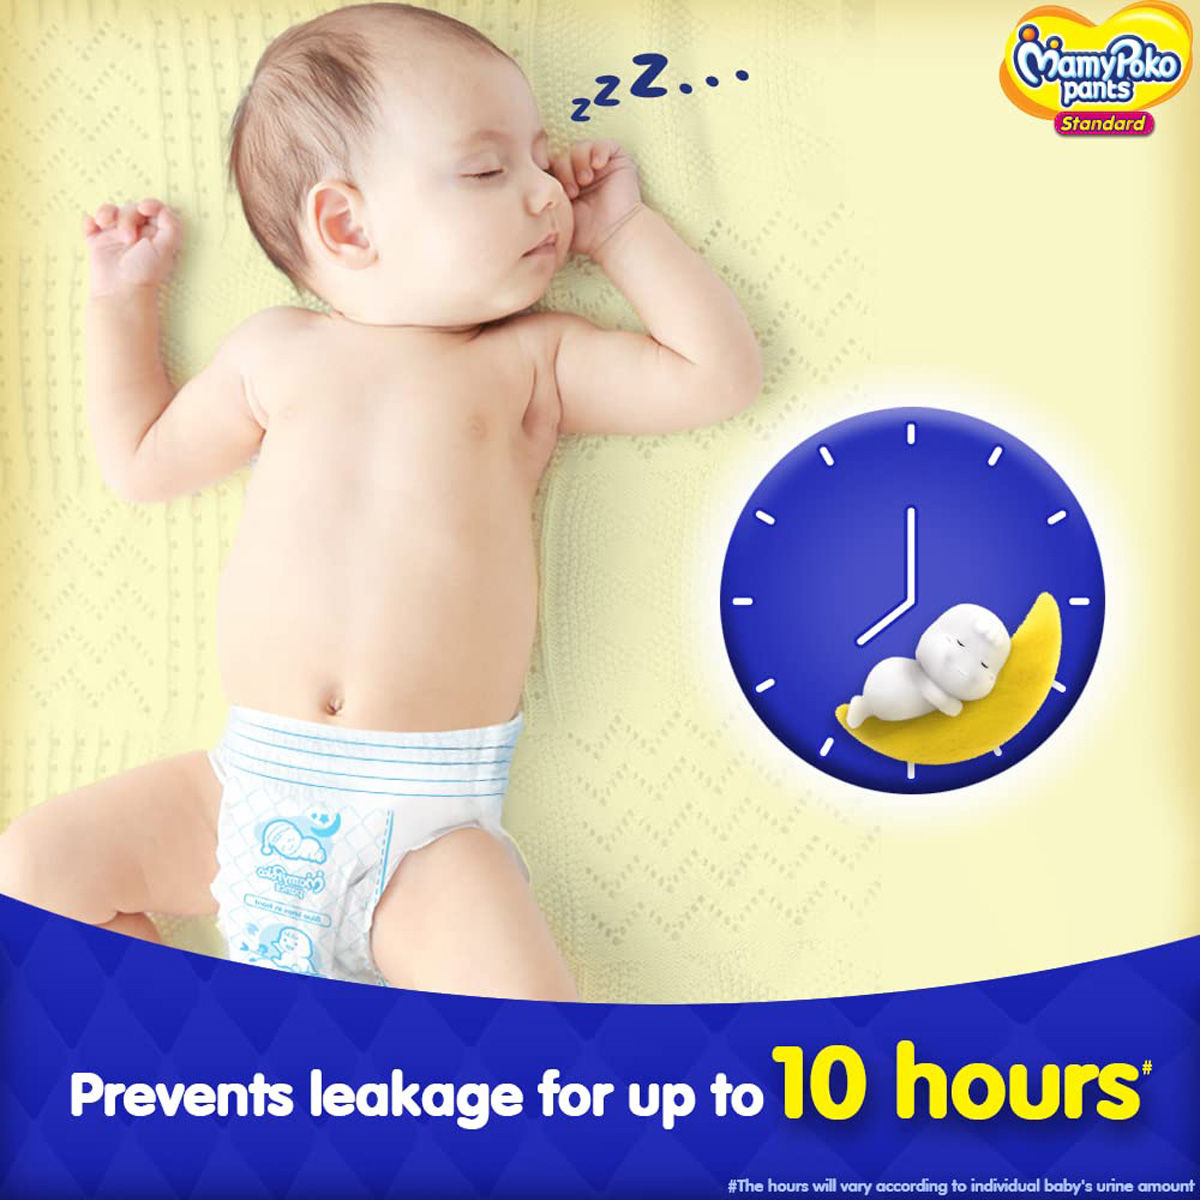 Buy MAMYPOKO PANTS EXTRA ABSORB DIAPERS (EXTRA LARGE) - 32 DIAPERS Online &  Get Upto 60% OFF at PharmEasy